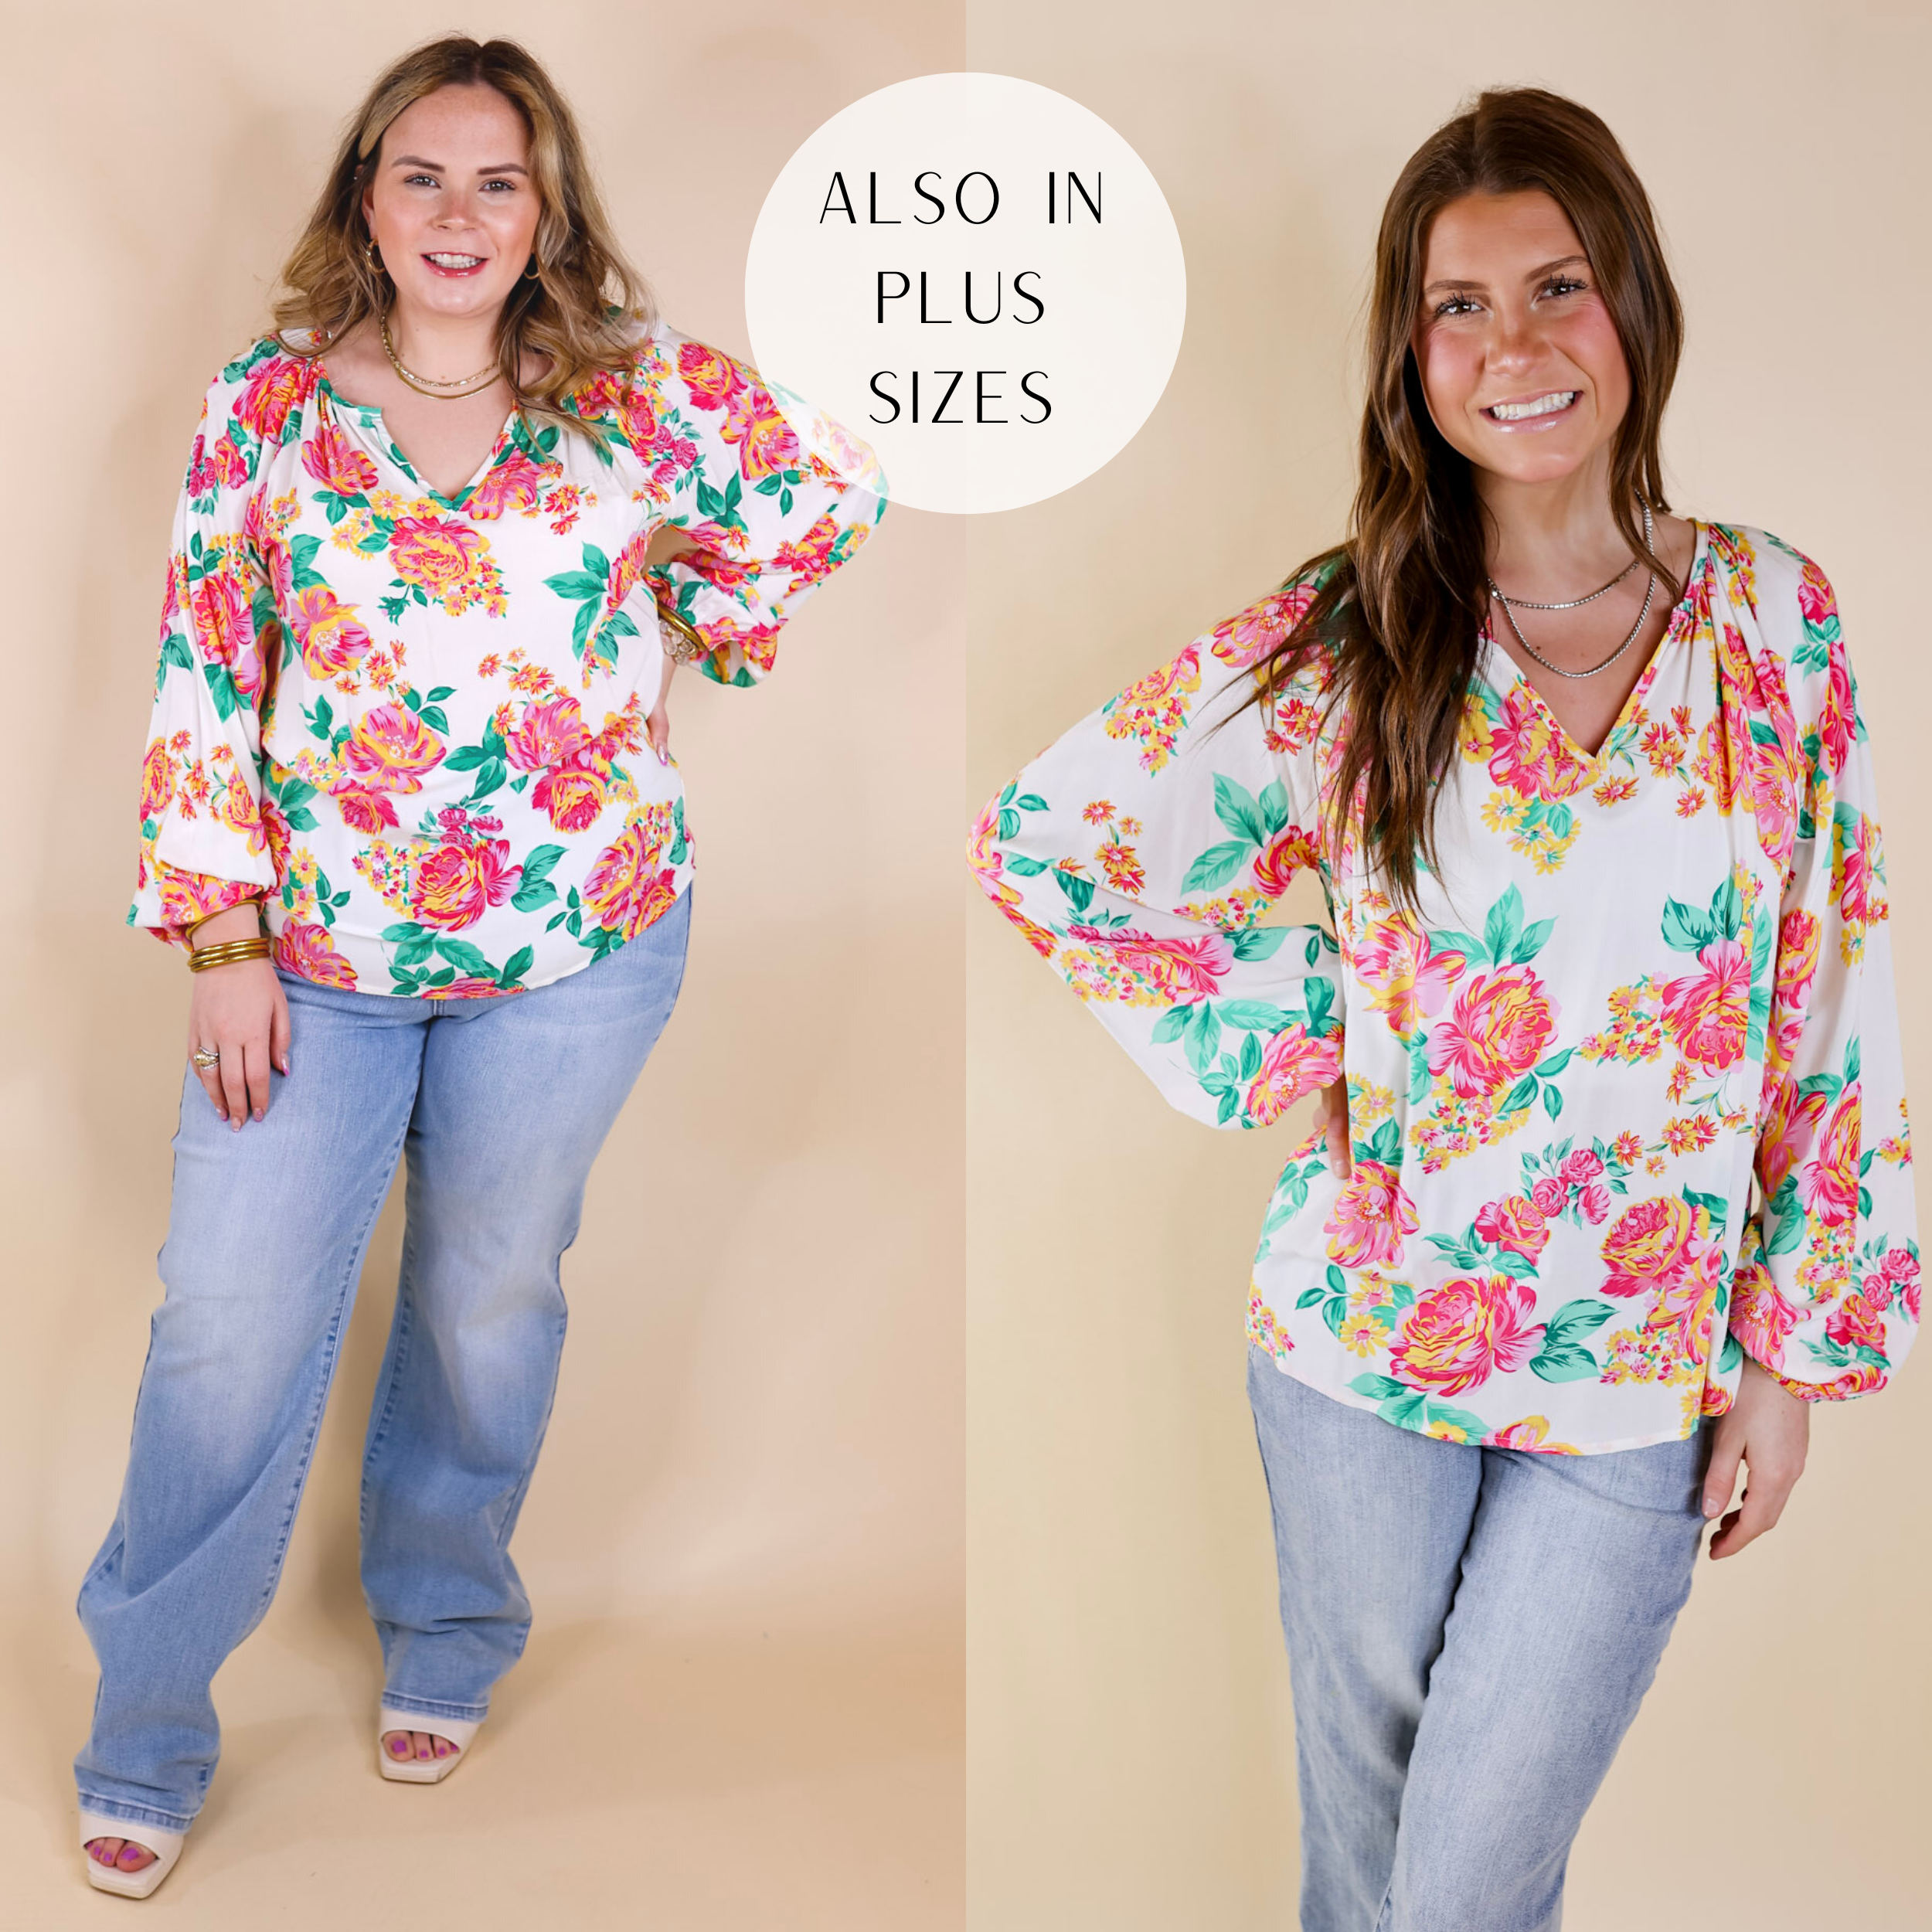 Models are wearing a long sleeve white top with a notched v neckline and a pink, green, and yellow floral print. SIze large model has it paired with wide leg jeans, white heels, and gold jewelry. Size small model has it paired with wide leg jeans and silver jewelry.